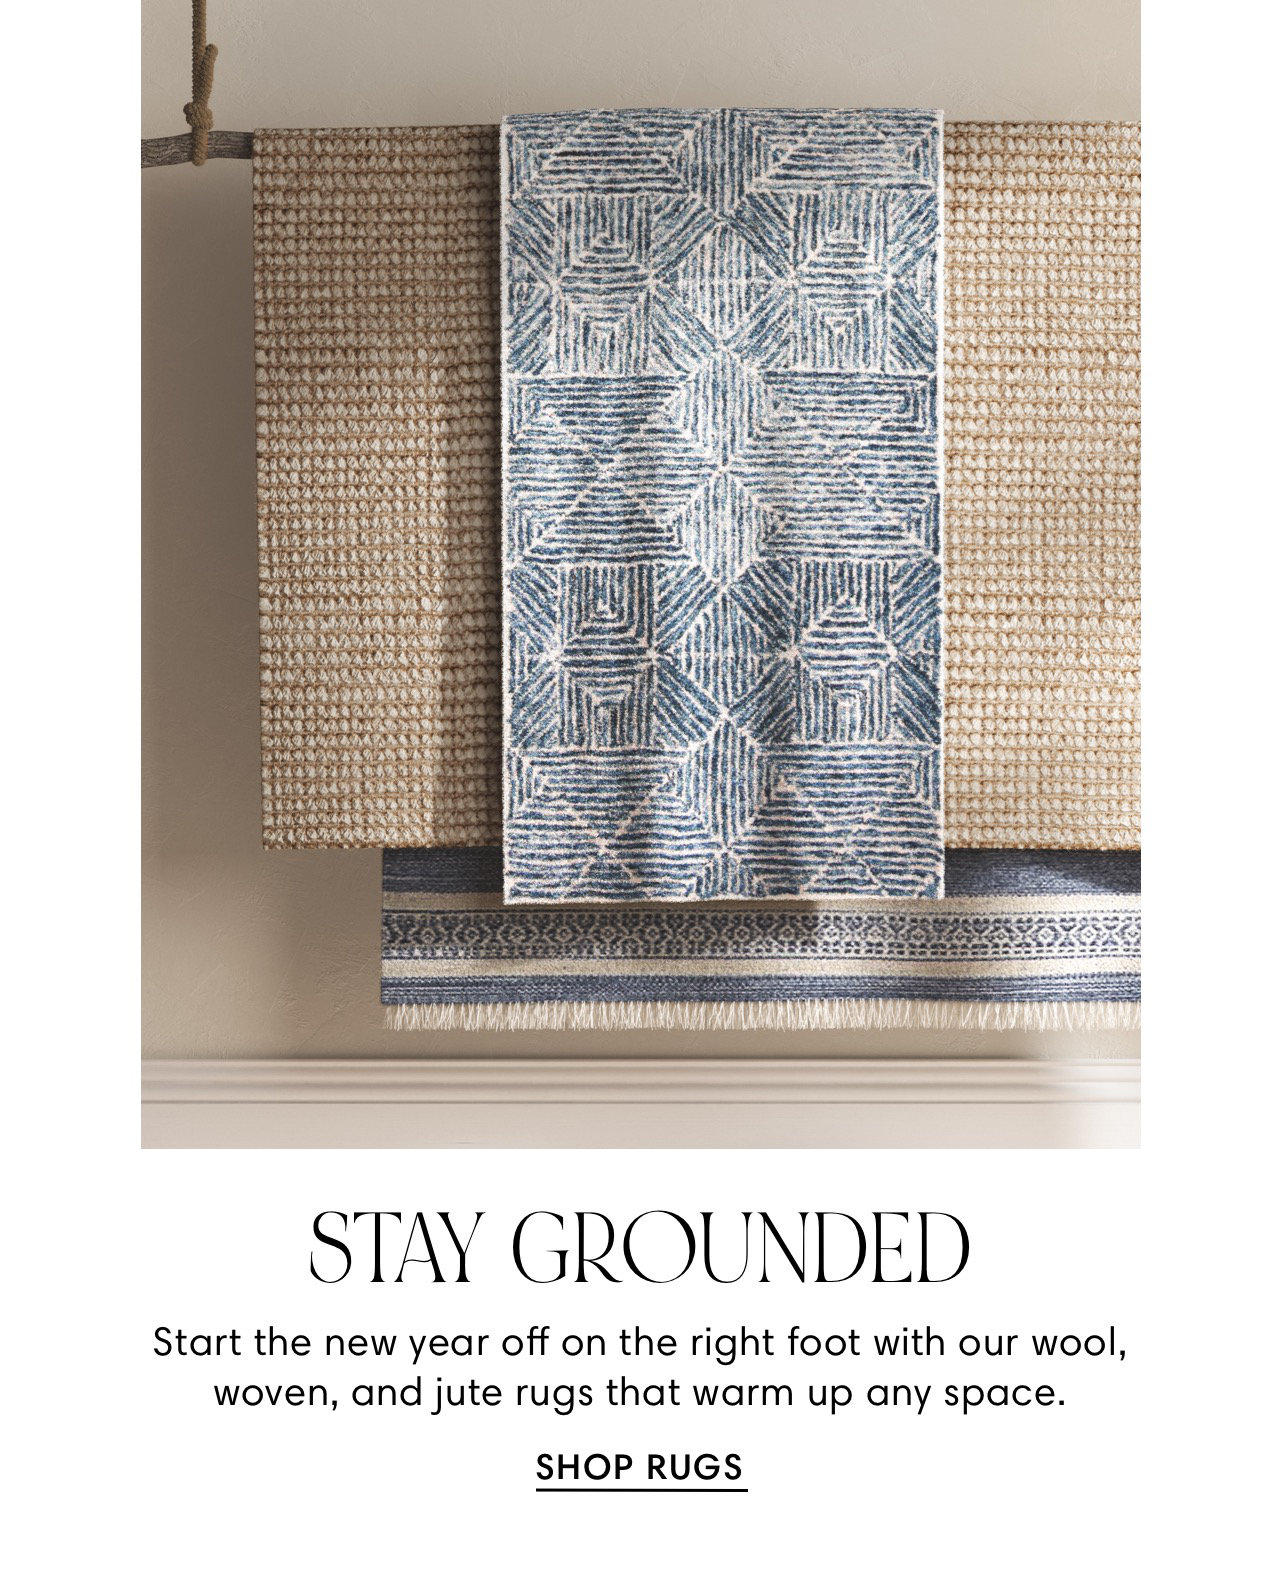 T UTLYY LR DY P SO LA STAY GROUNDED Start the new year off on the right foot with our wool, woven, and jute rugs that warm up any space. SHOP RUGS 